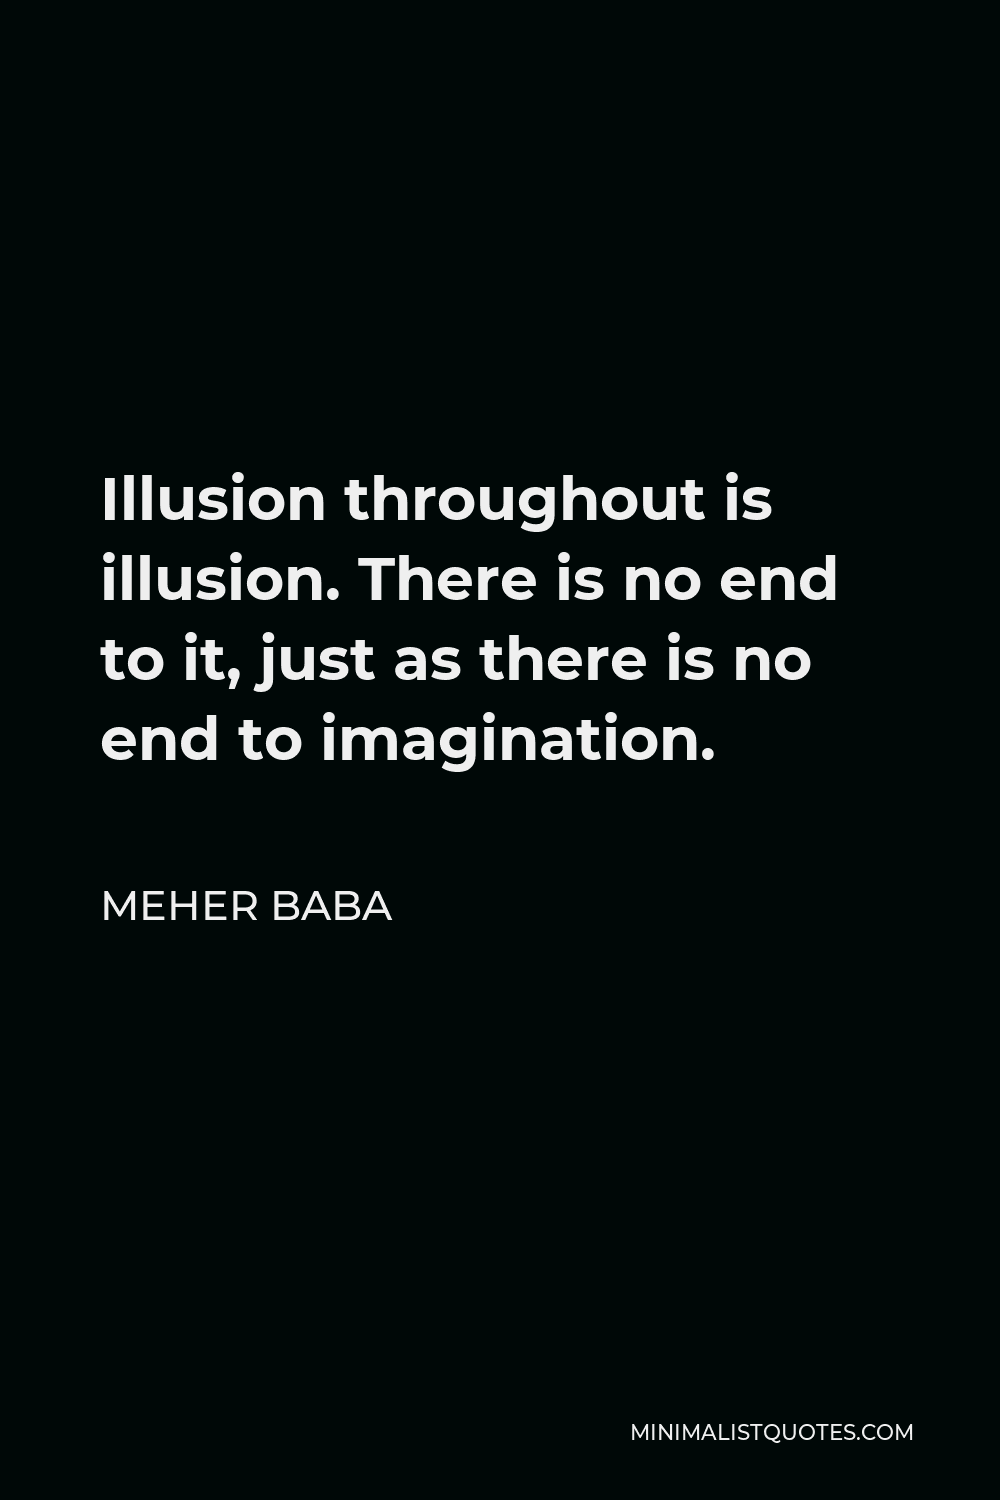 Meher Baba Quote - Illusion throughout is illusion. There is no end to it, just as there is no end to imagination.